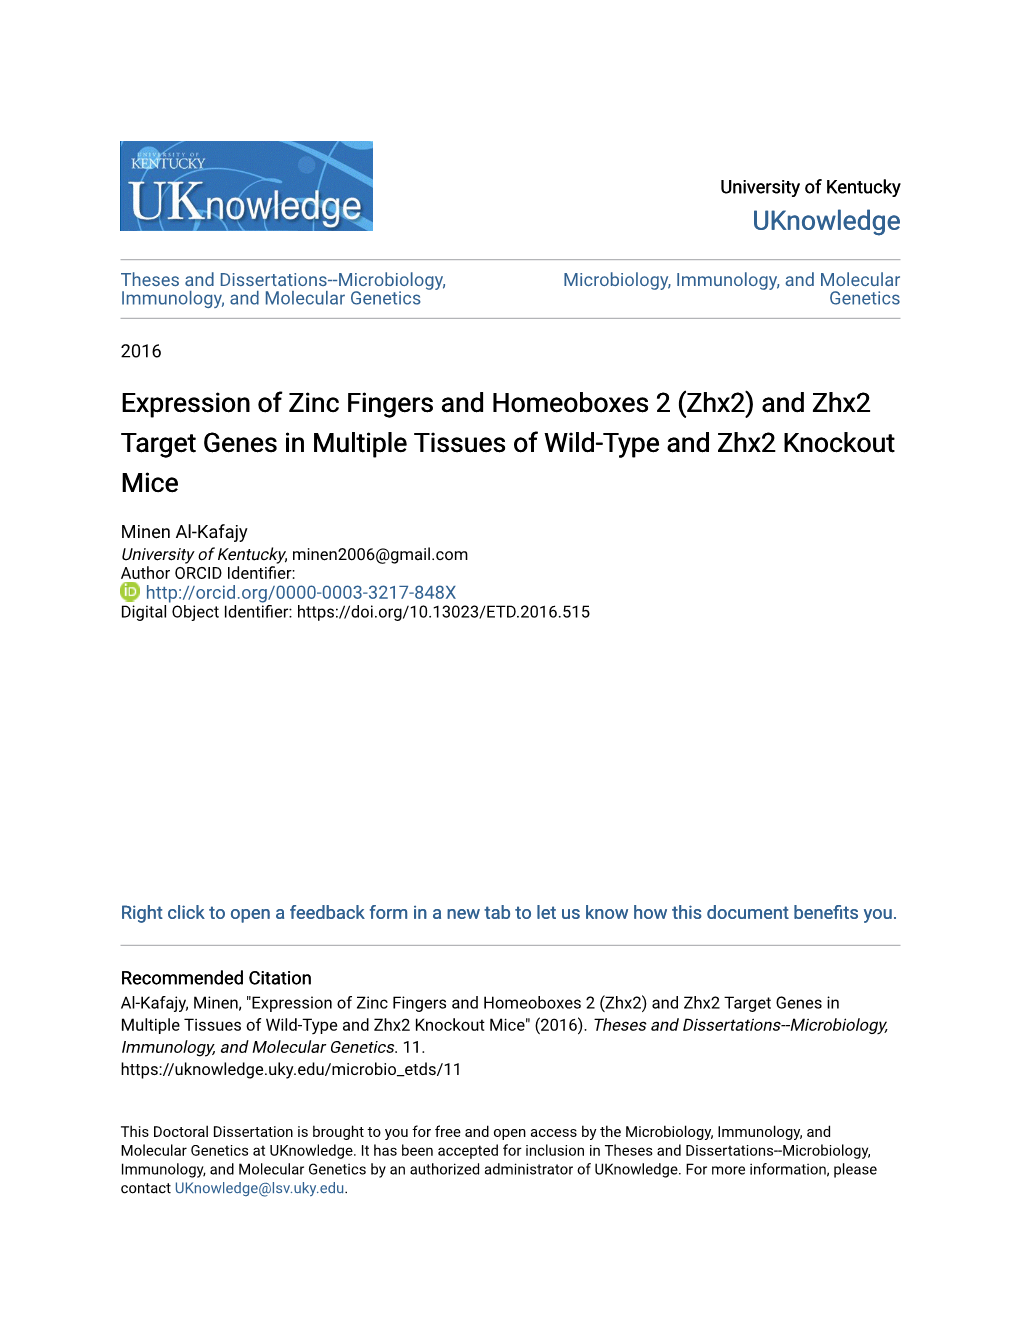 Expression of Zinc Fingers and Homeoboxes 2 (Zhx2) and Zhx2 Target Genes in Multiple Tissues of Wild-Type and Zhx2 Knockout Mice